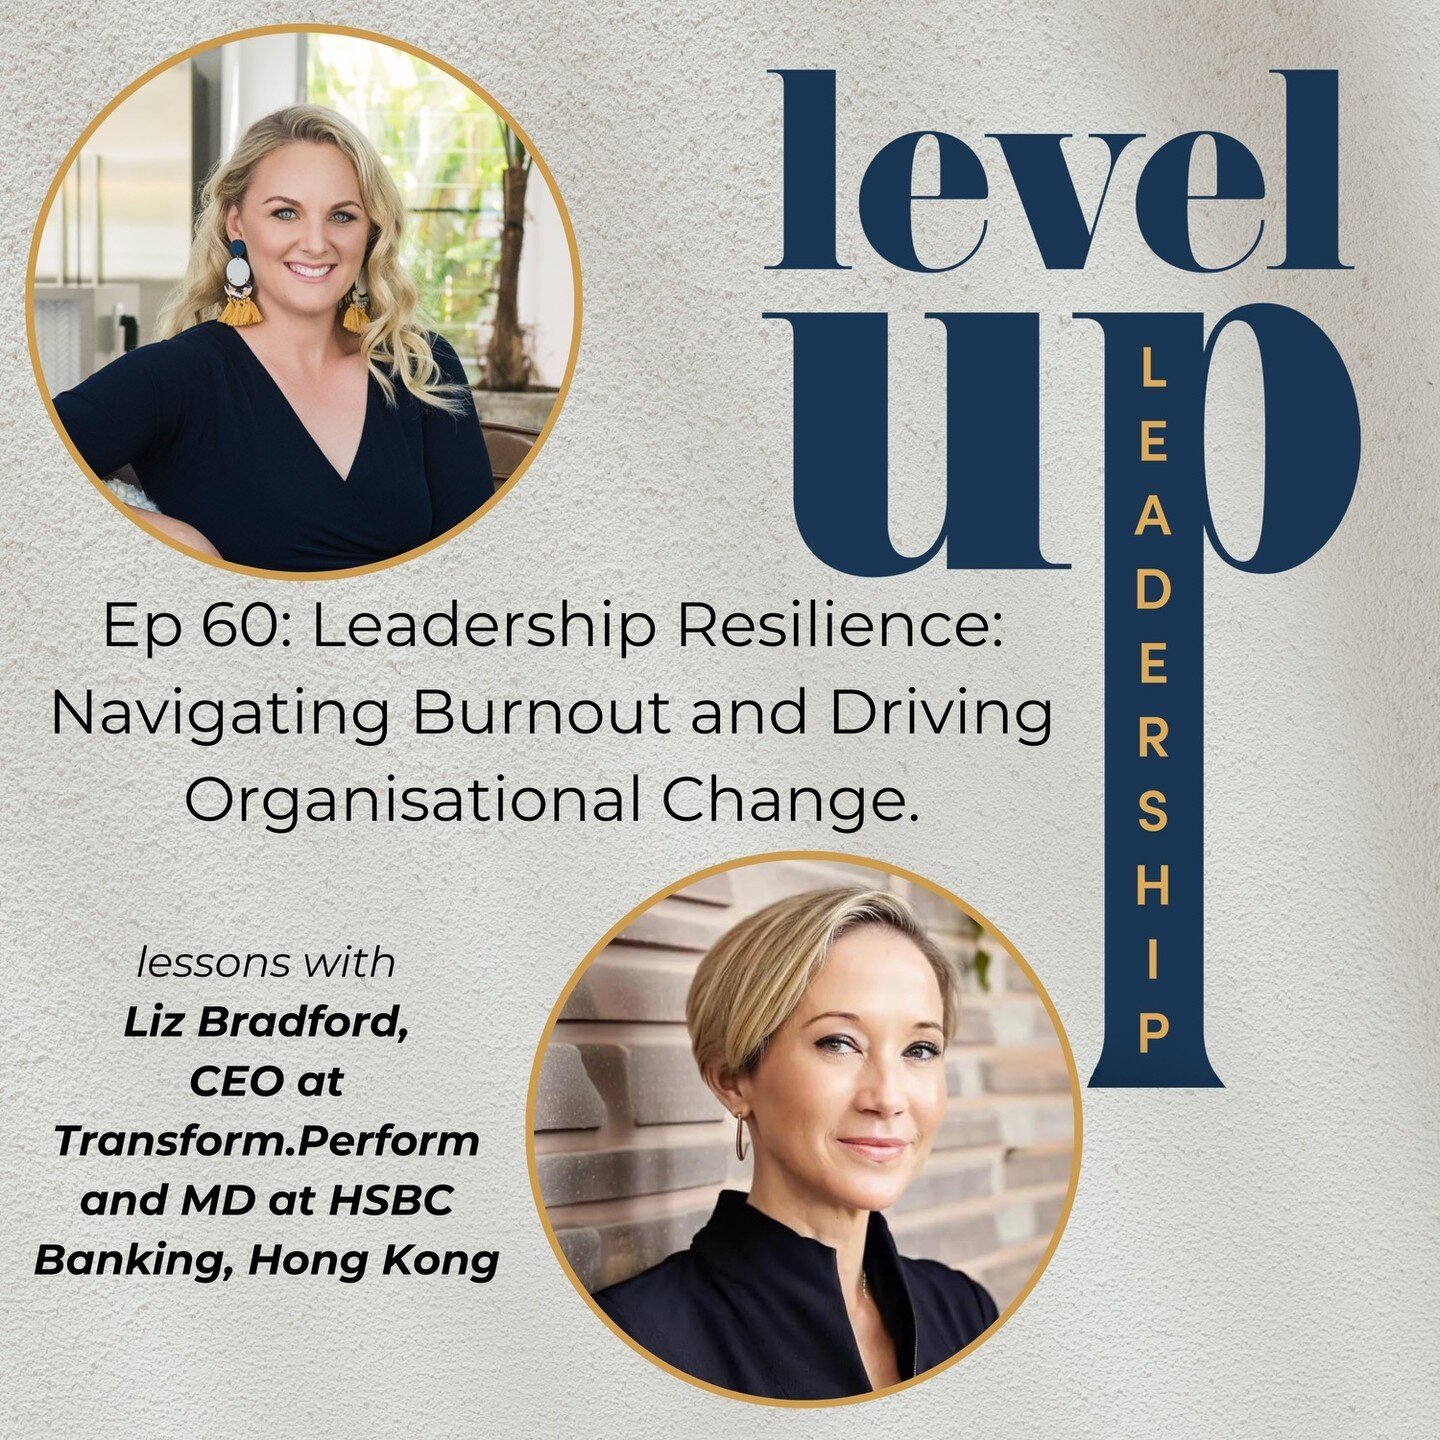 Have you experienced burnout, or know someone who has? 

This week, we sit down with the incredible Liz Bradford, Managing Director of Wholesale Banking at HSBC Asia and CEO of Transform Perform, as she takes us on a journey through her 20 years of d